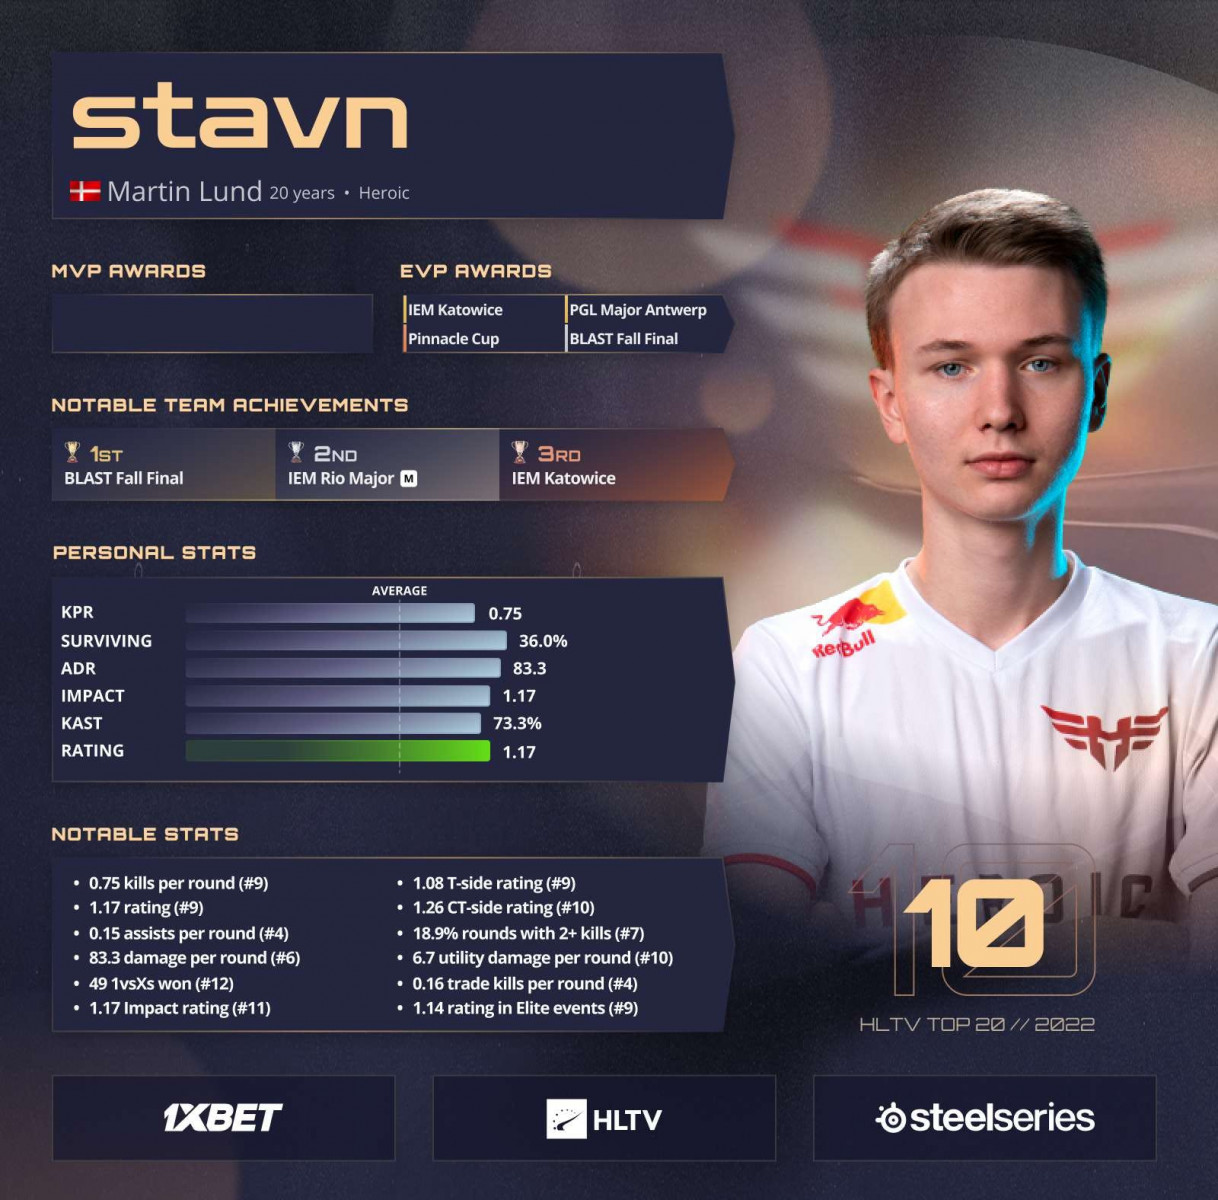 stavn ranks tenth in HLTV.org's Top 20 players